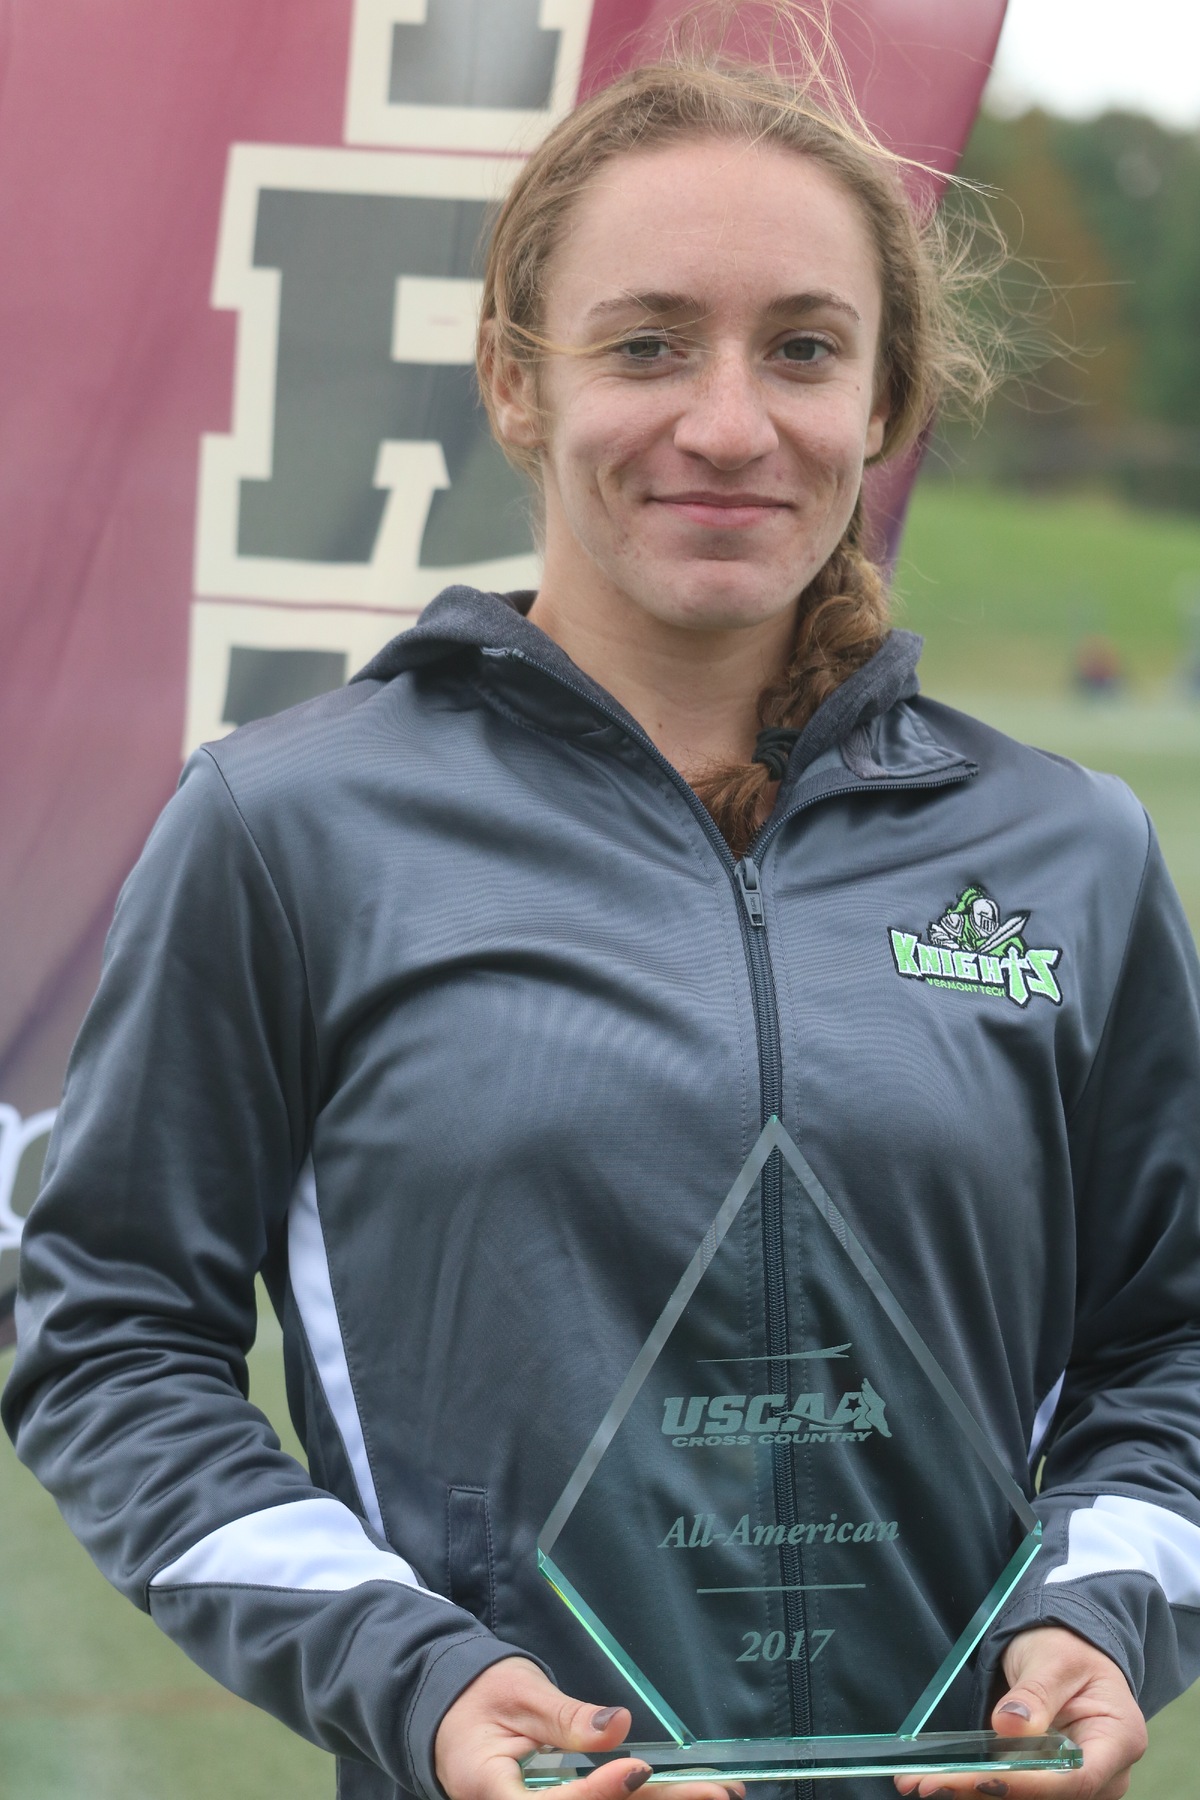 Senior Rebecca Broadbent takes 3rd place All-American Finish at USCAA National Championships